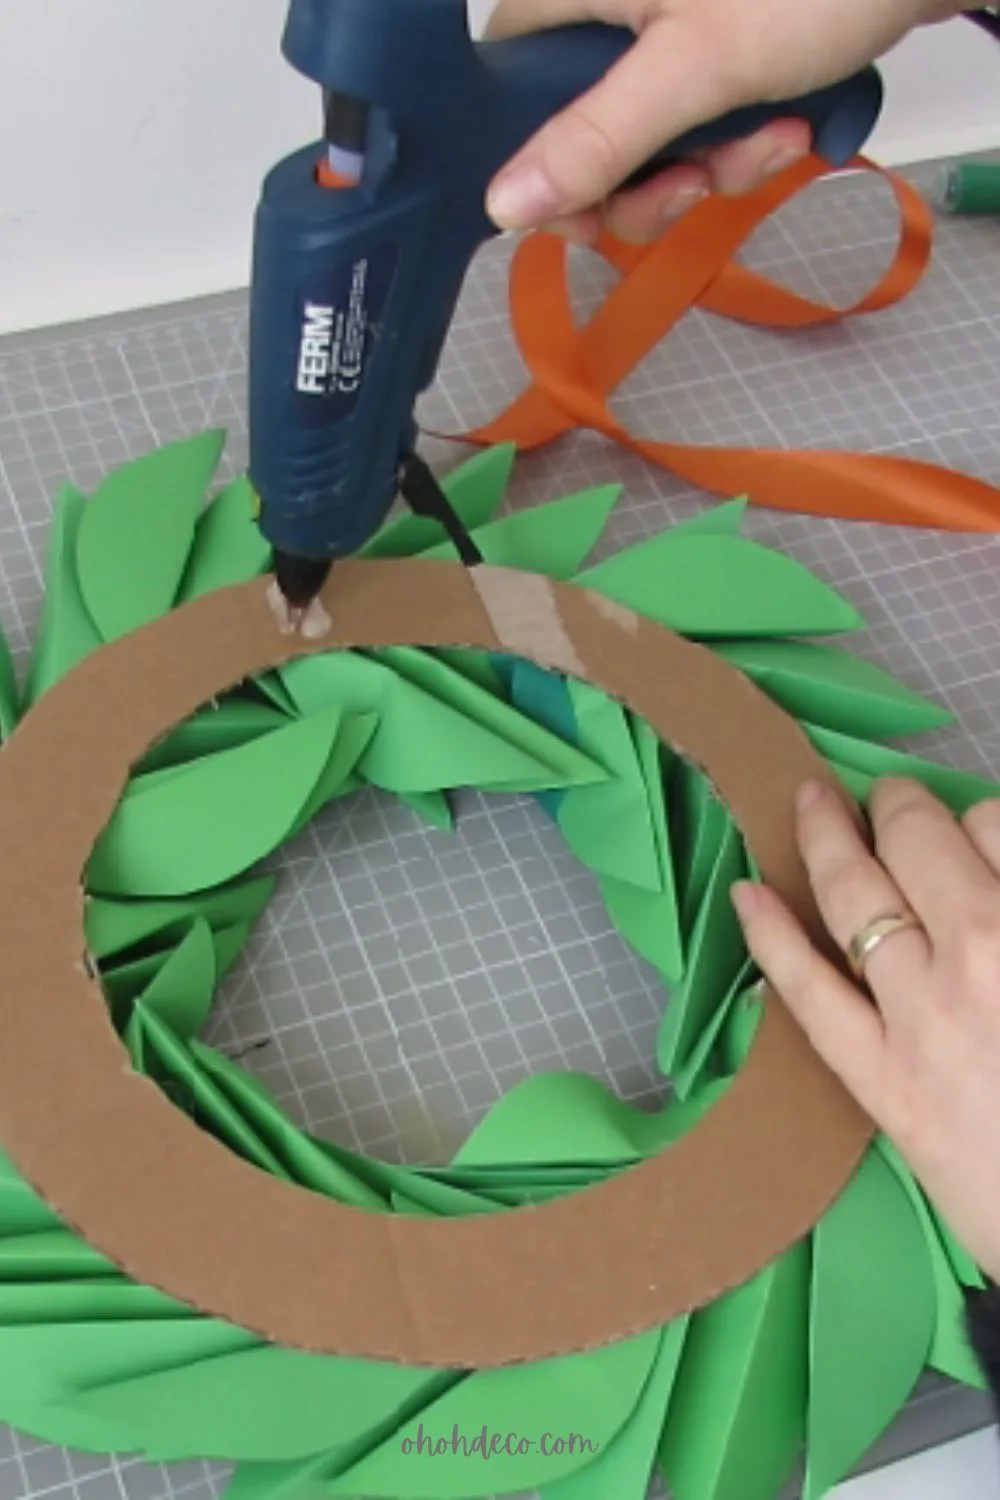 glue the ribbon to hang the paper wreath